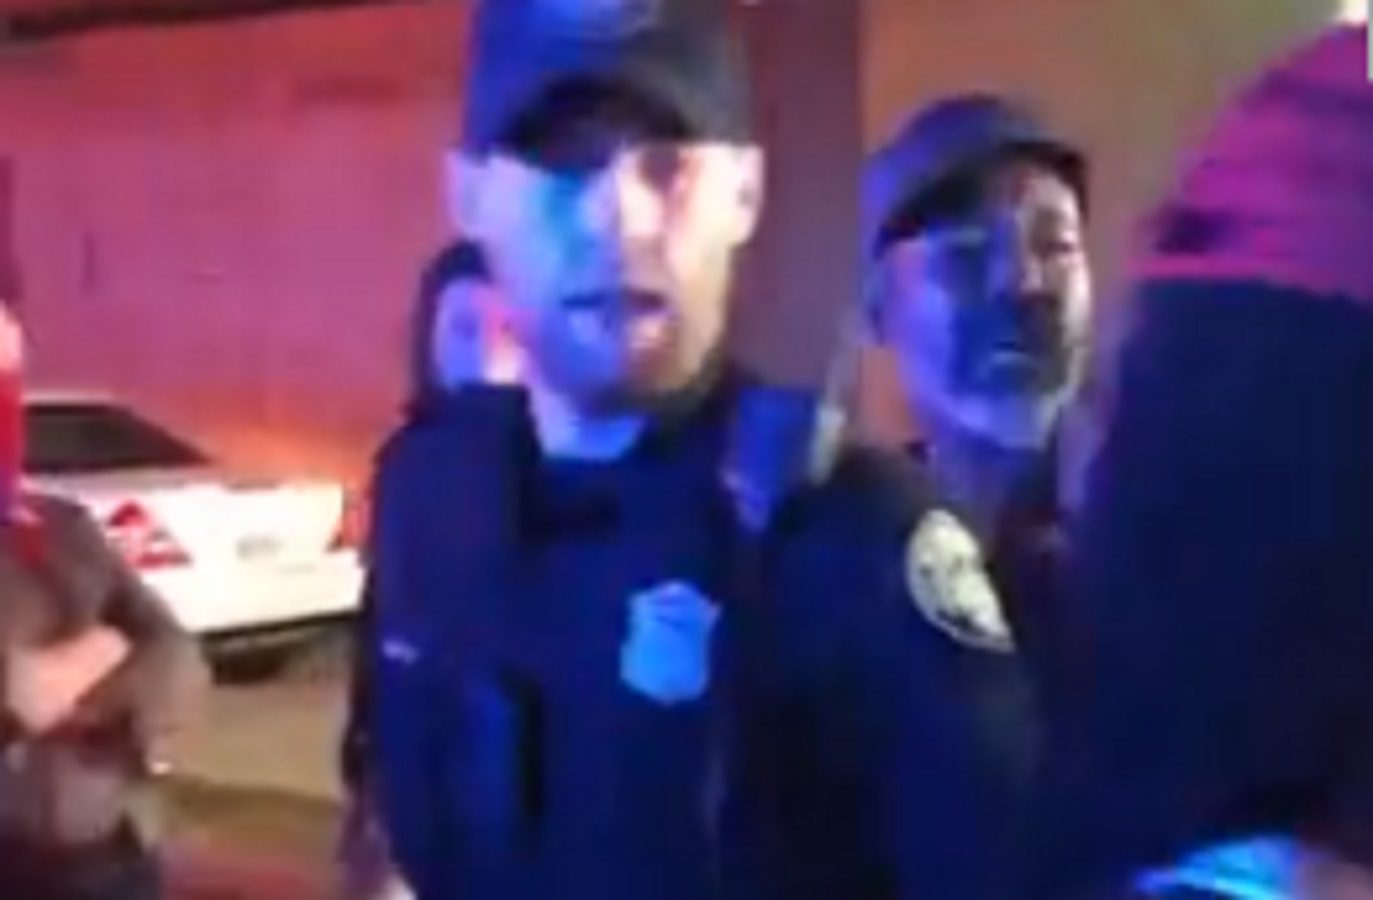 WATCH: Mob Surrounds Cop Trying to Respond to Shooting in Atlanta, 'Get Your White Face Out of Here' | The Gateway Pundit | by Cassandra MacDonald